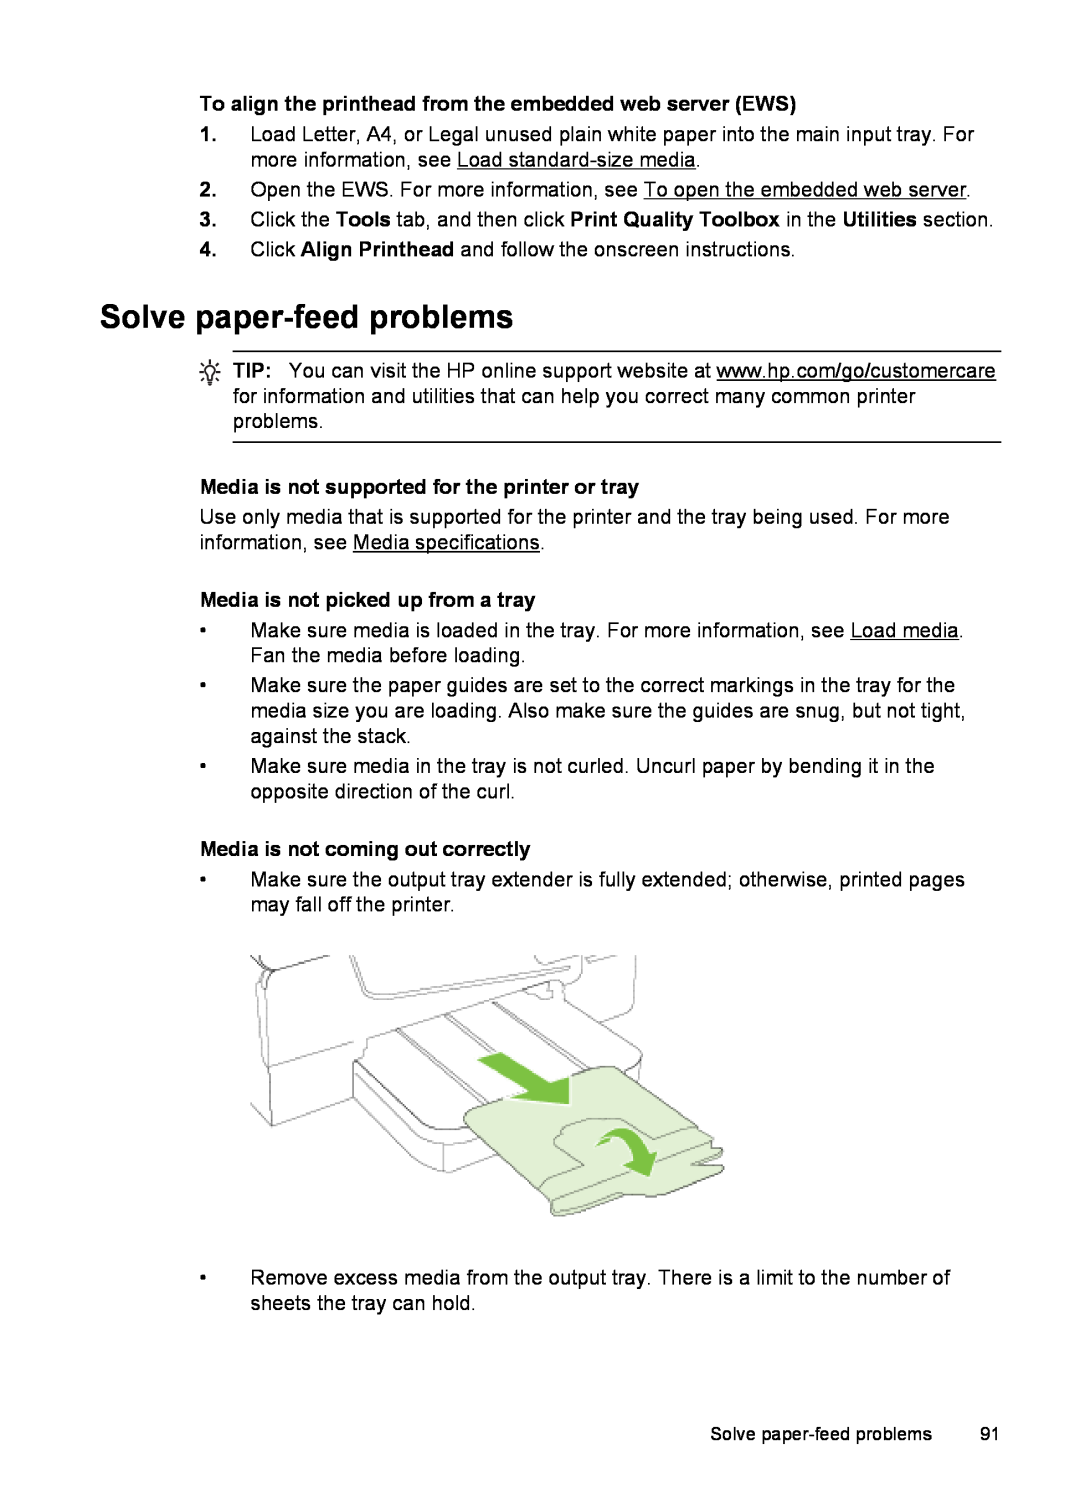 HP 6600 - H7 manual Solve paper-feed problems, To align the printhead from the embedded web server EWS 